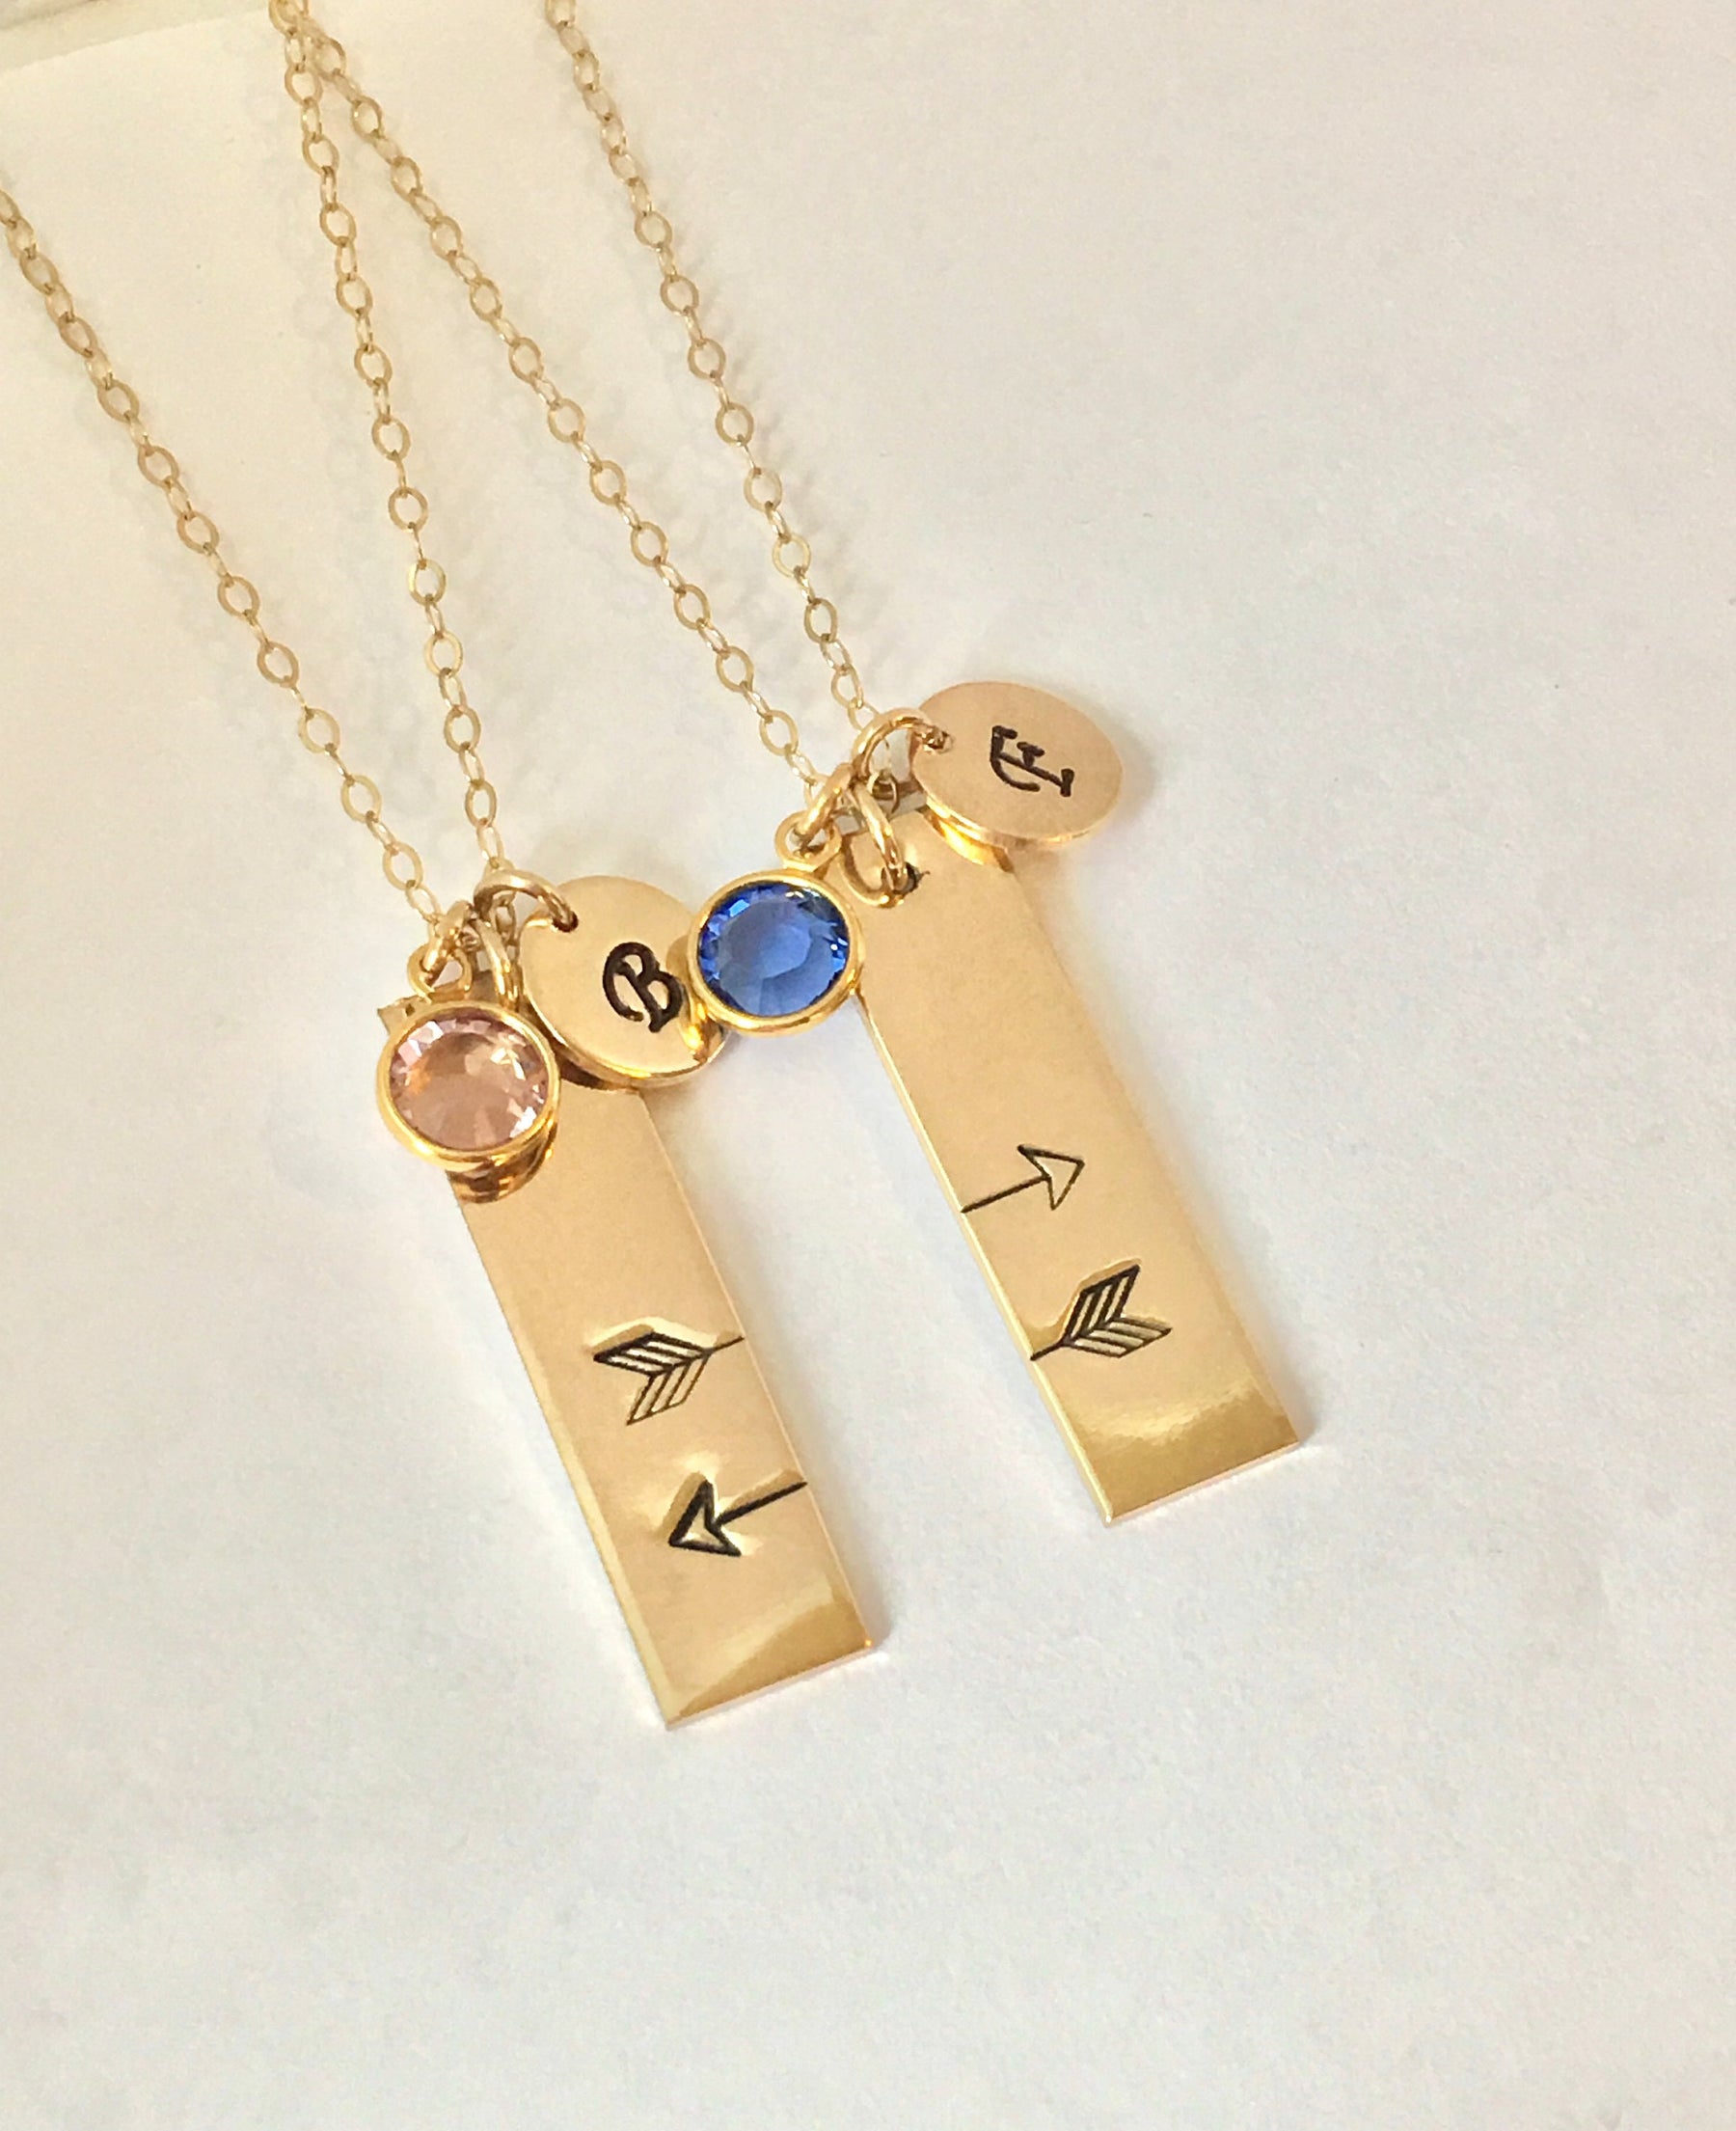 Partners in Crime Necklaces, Best Friends Necklaces, 2 Necklaces, Partners  in Crime Necklaces, Best Friends Jewelry, Sister Necklace Set | Wish